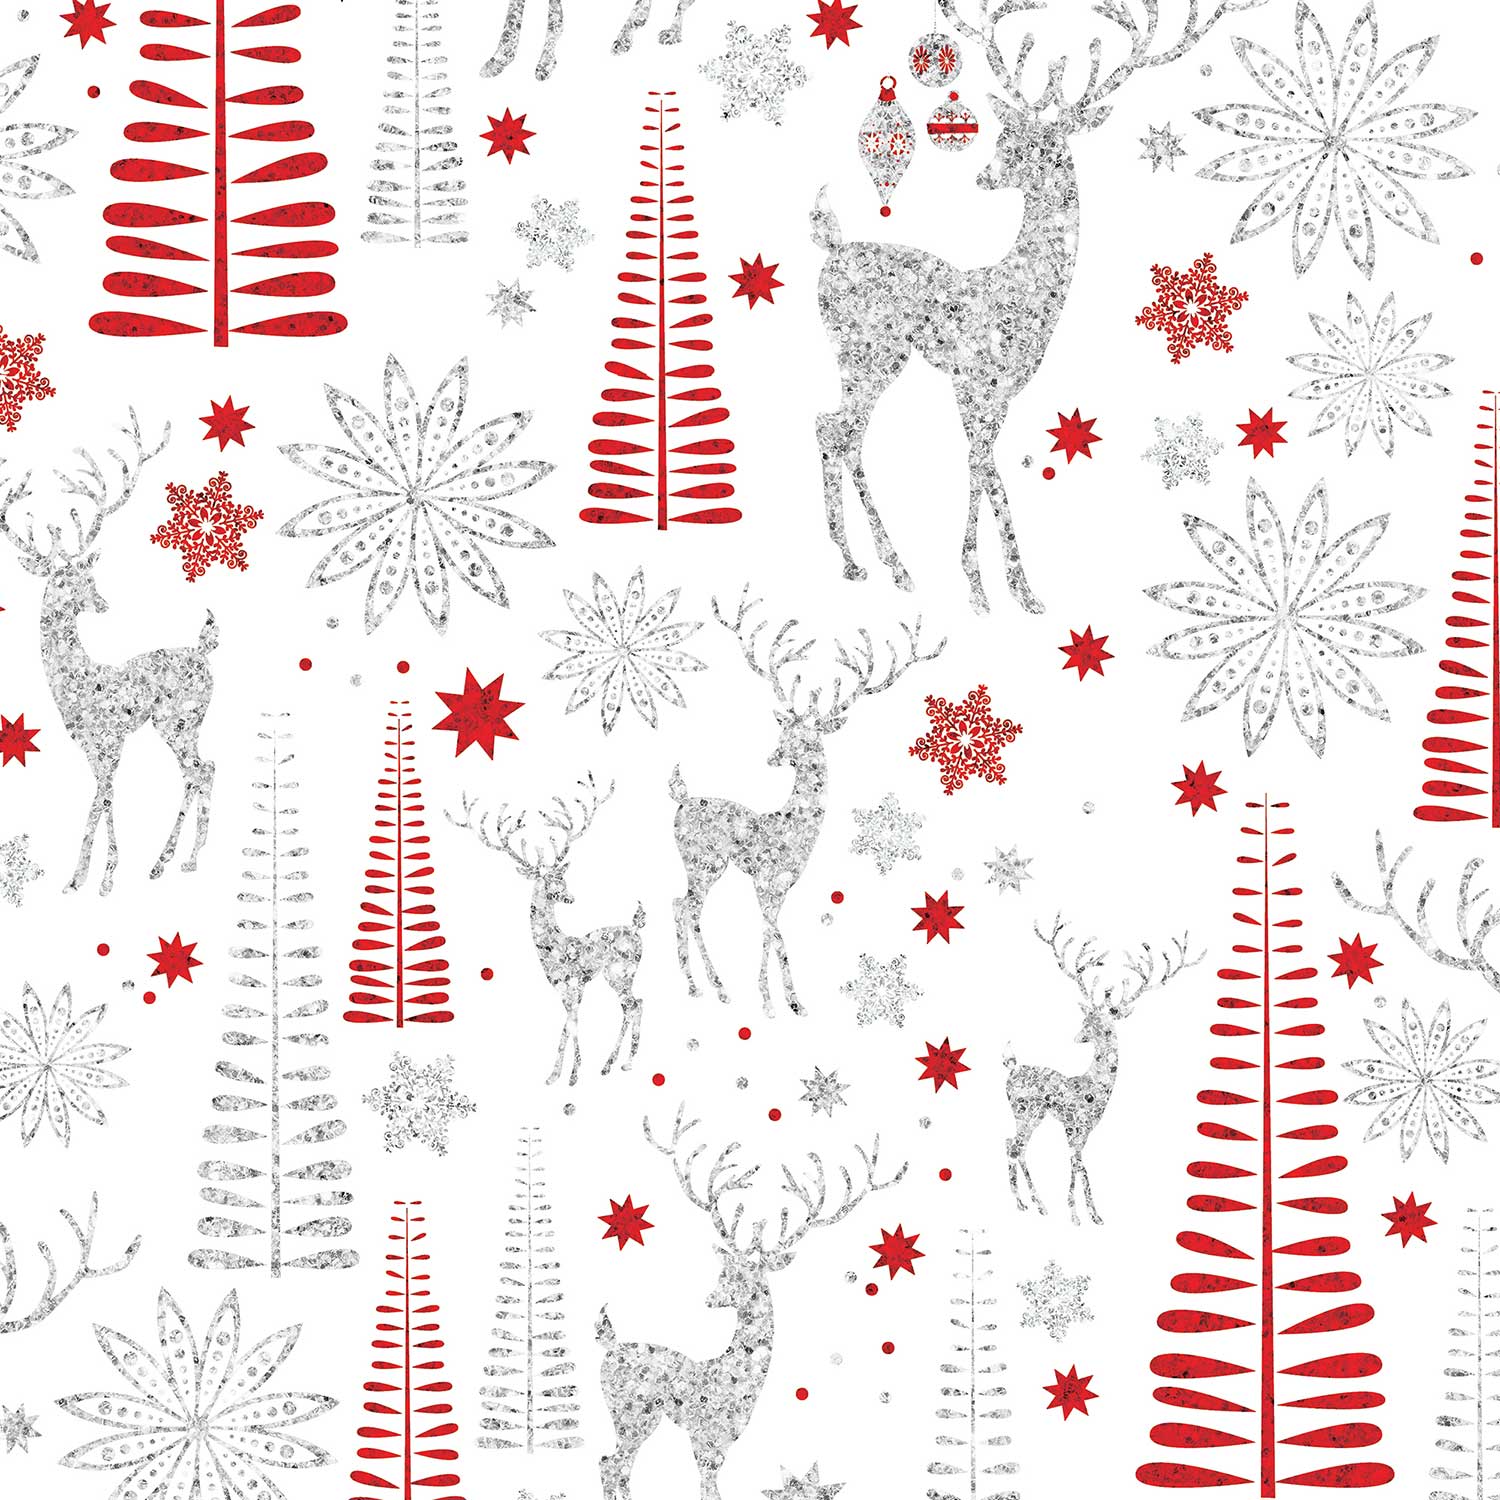 XB788a Reindeer Christmas Gift Wrapping Paper Swatch 